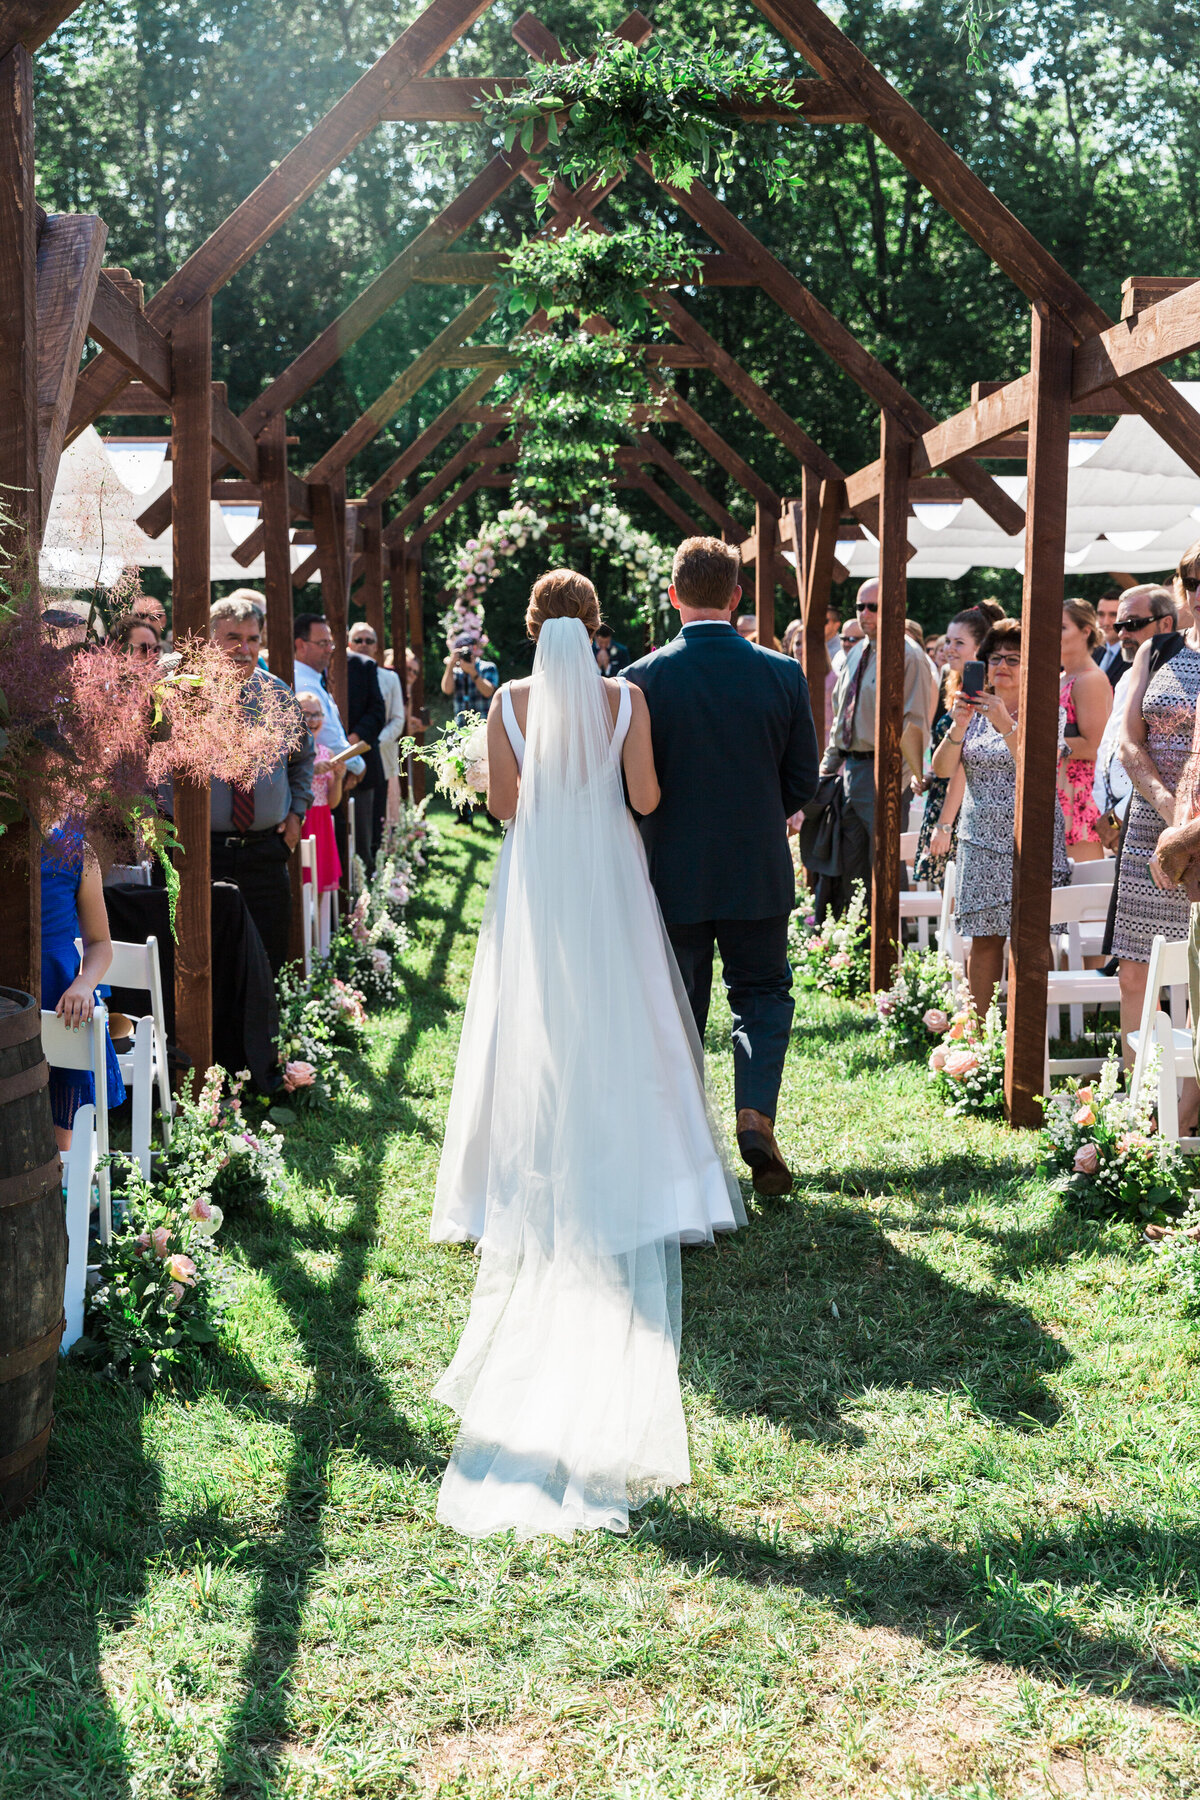 Bride and her father walking down the aisle underneath wooden arches